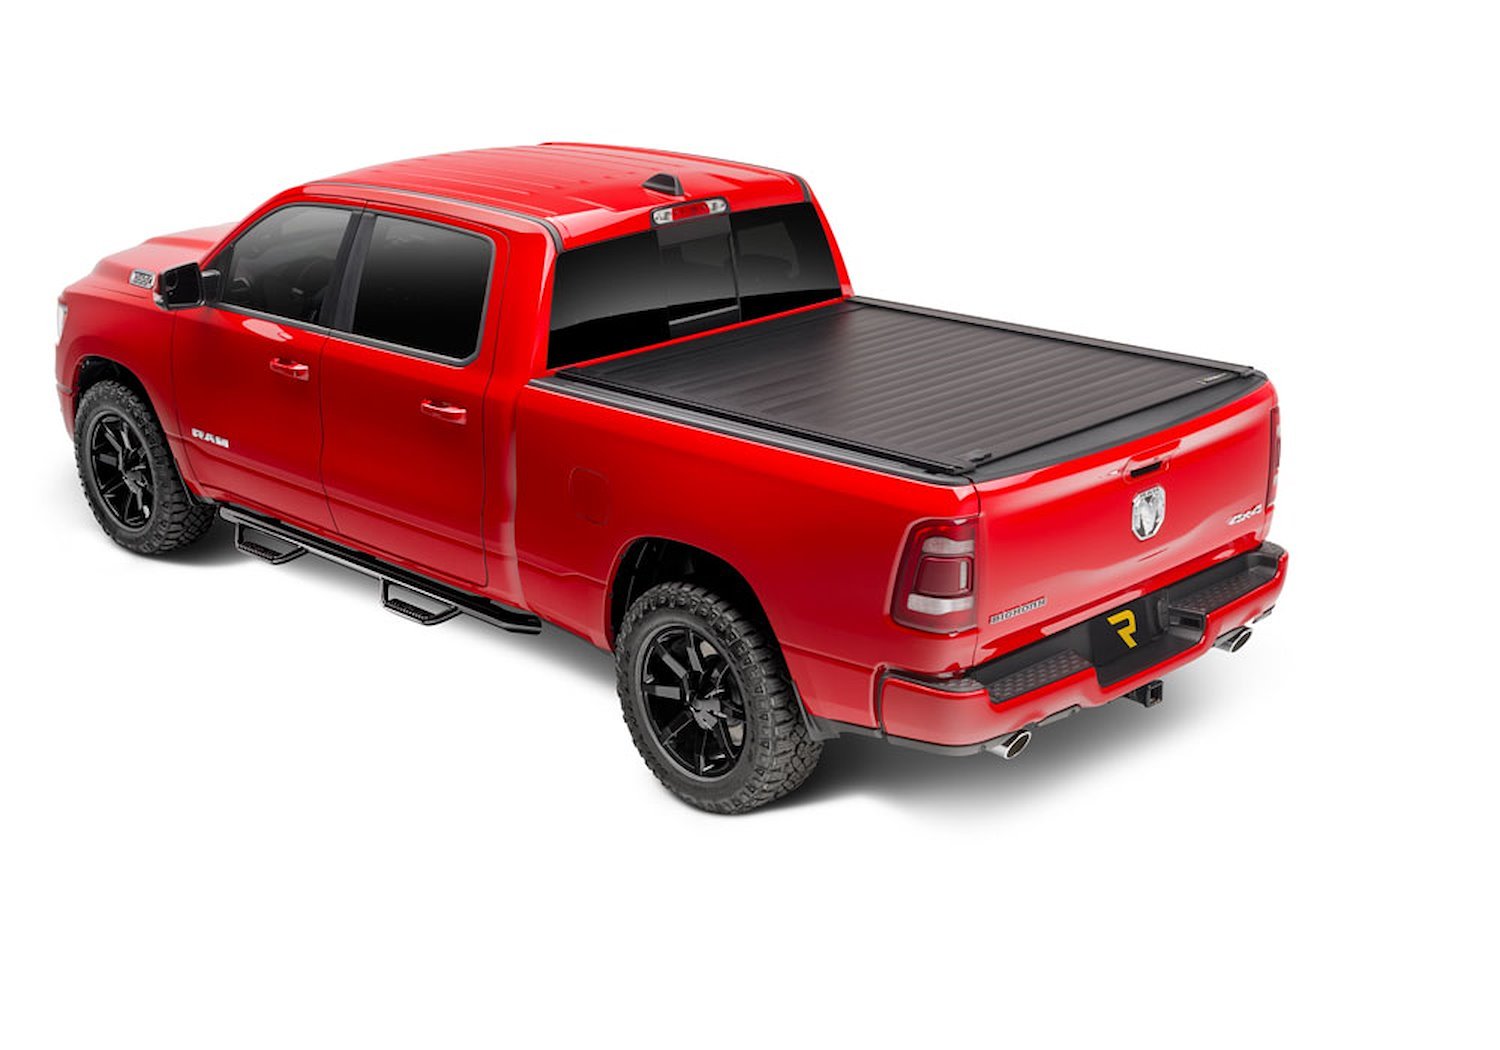 T-80233 RetraxPRO XR Retractable Tonneau Cover Fits Select Ram 1500/2500/3500 8' Bed without Stake Pockets